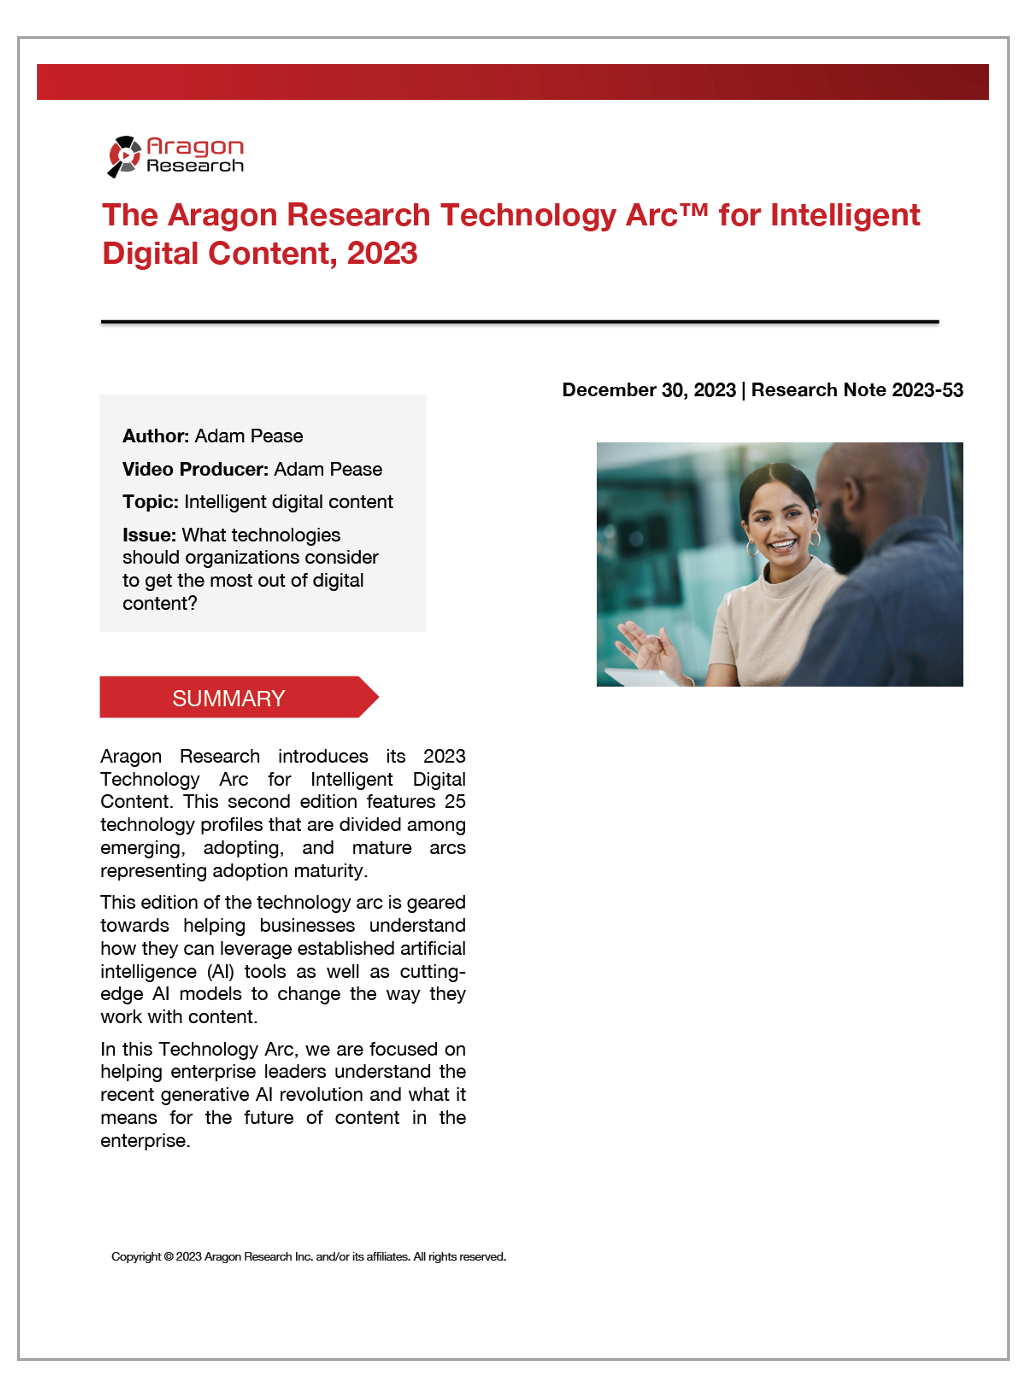 2023-53 The Aragon Research Technology Arc for Intelligent Digital Content, 2023